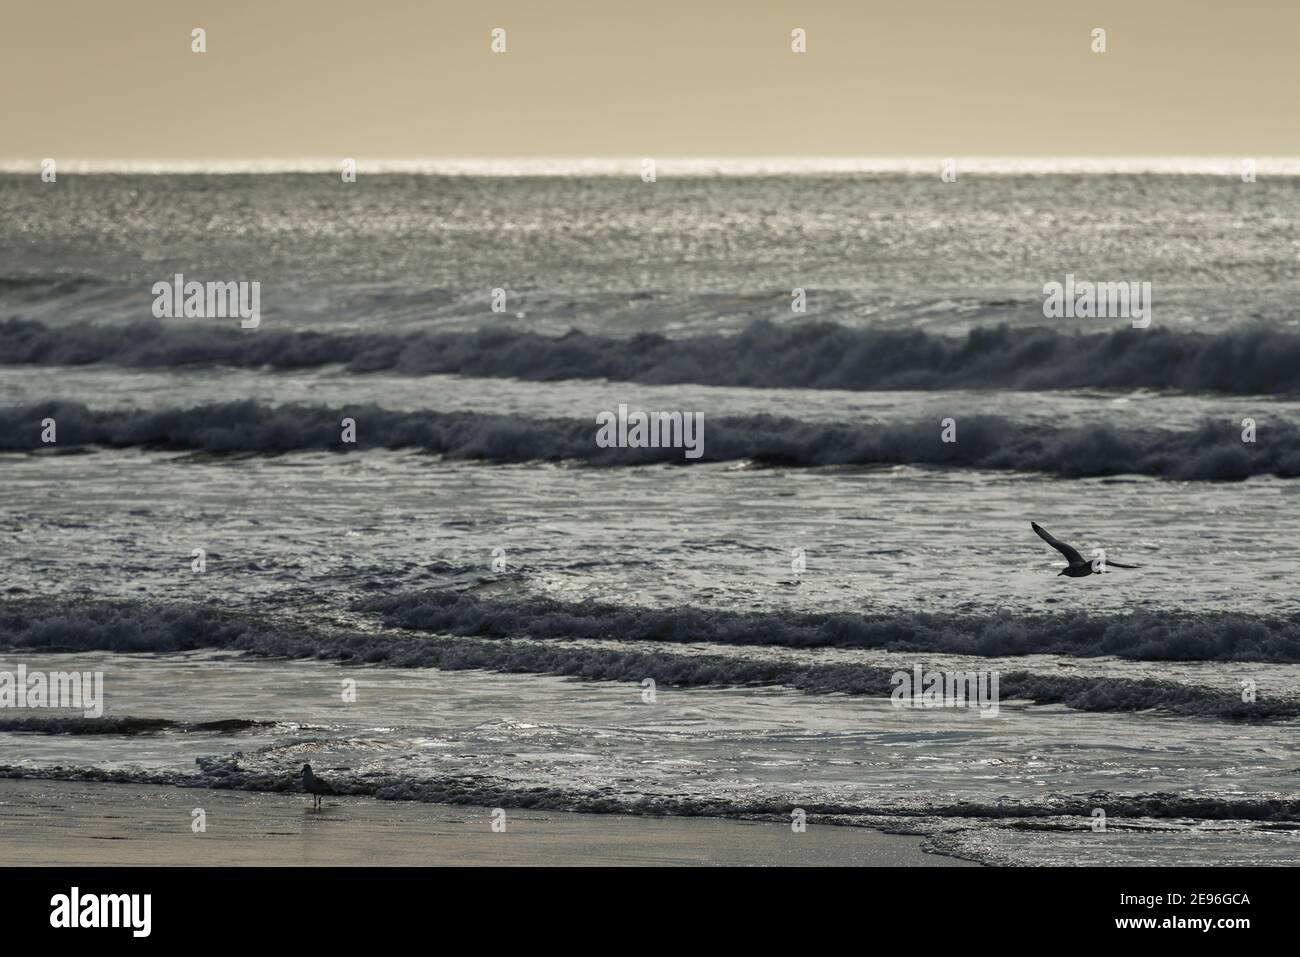 Seagulls flying at Pismo Beach, CA Stock Photo